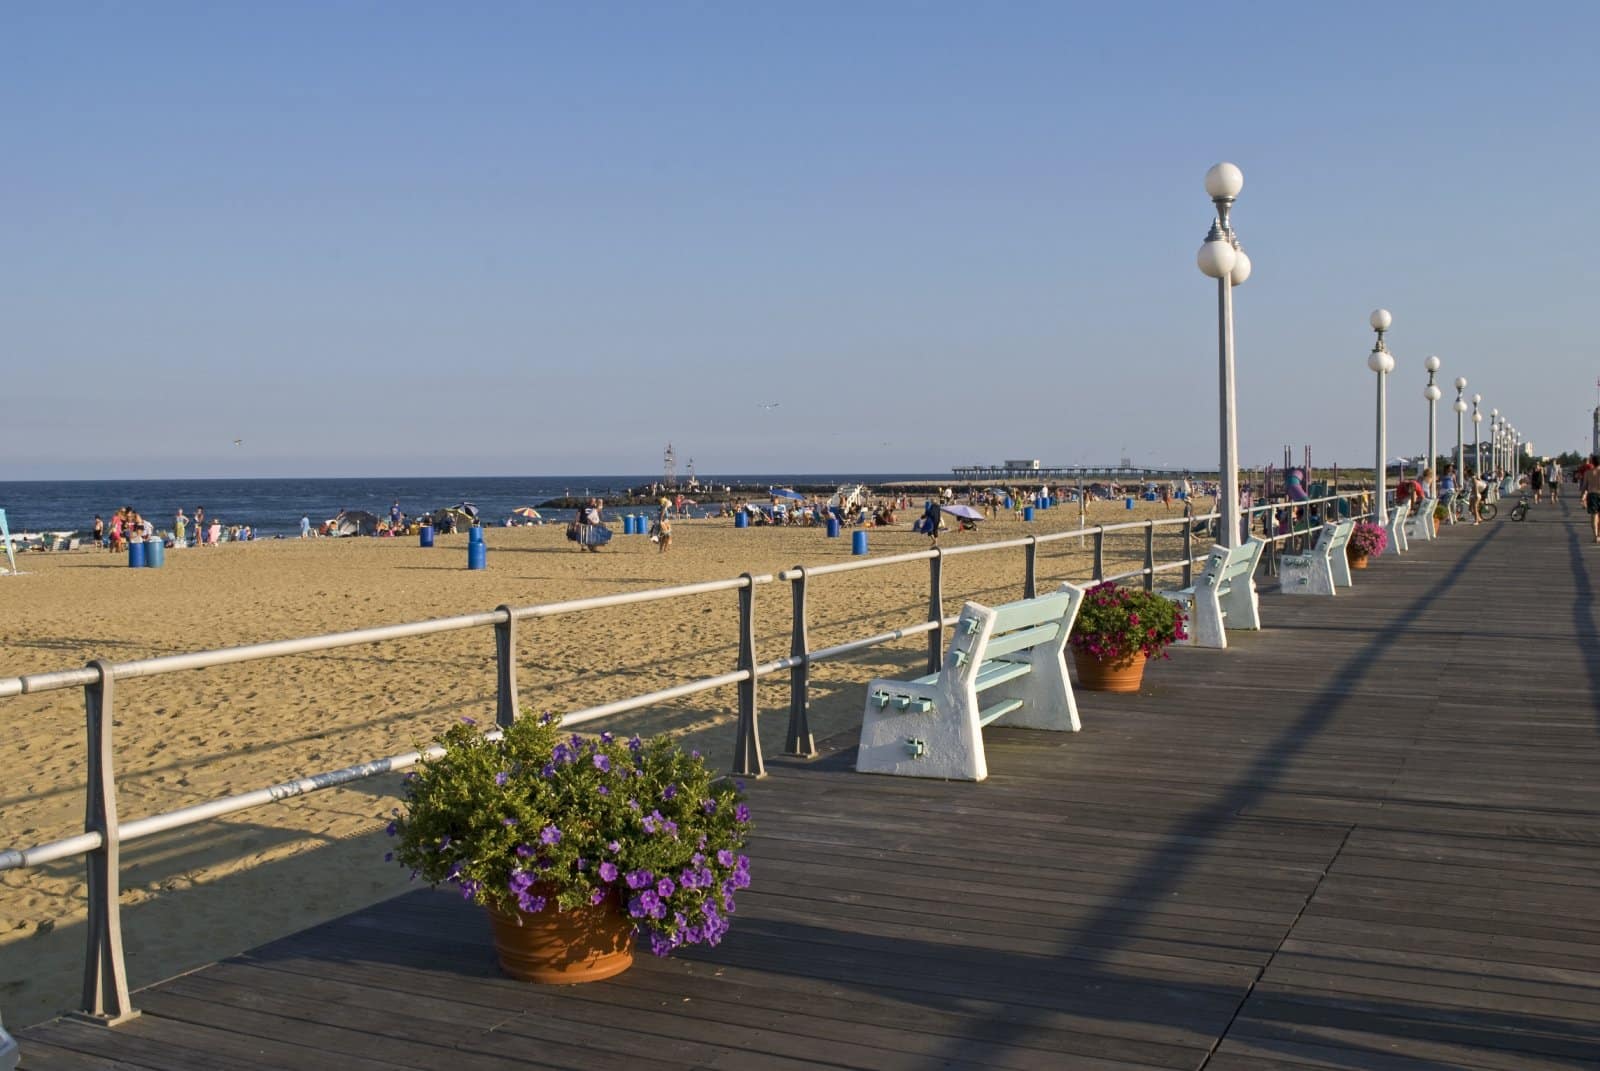 <p>The Jersey Shore and historical attractions help New Jersey net about $45 billion in tourism revenue. Beach passes can cost upwards of $10 per day during the summer months, contributing to the state’s tourism income.</p>